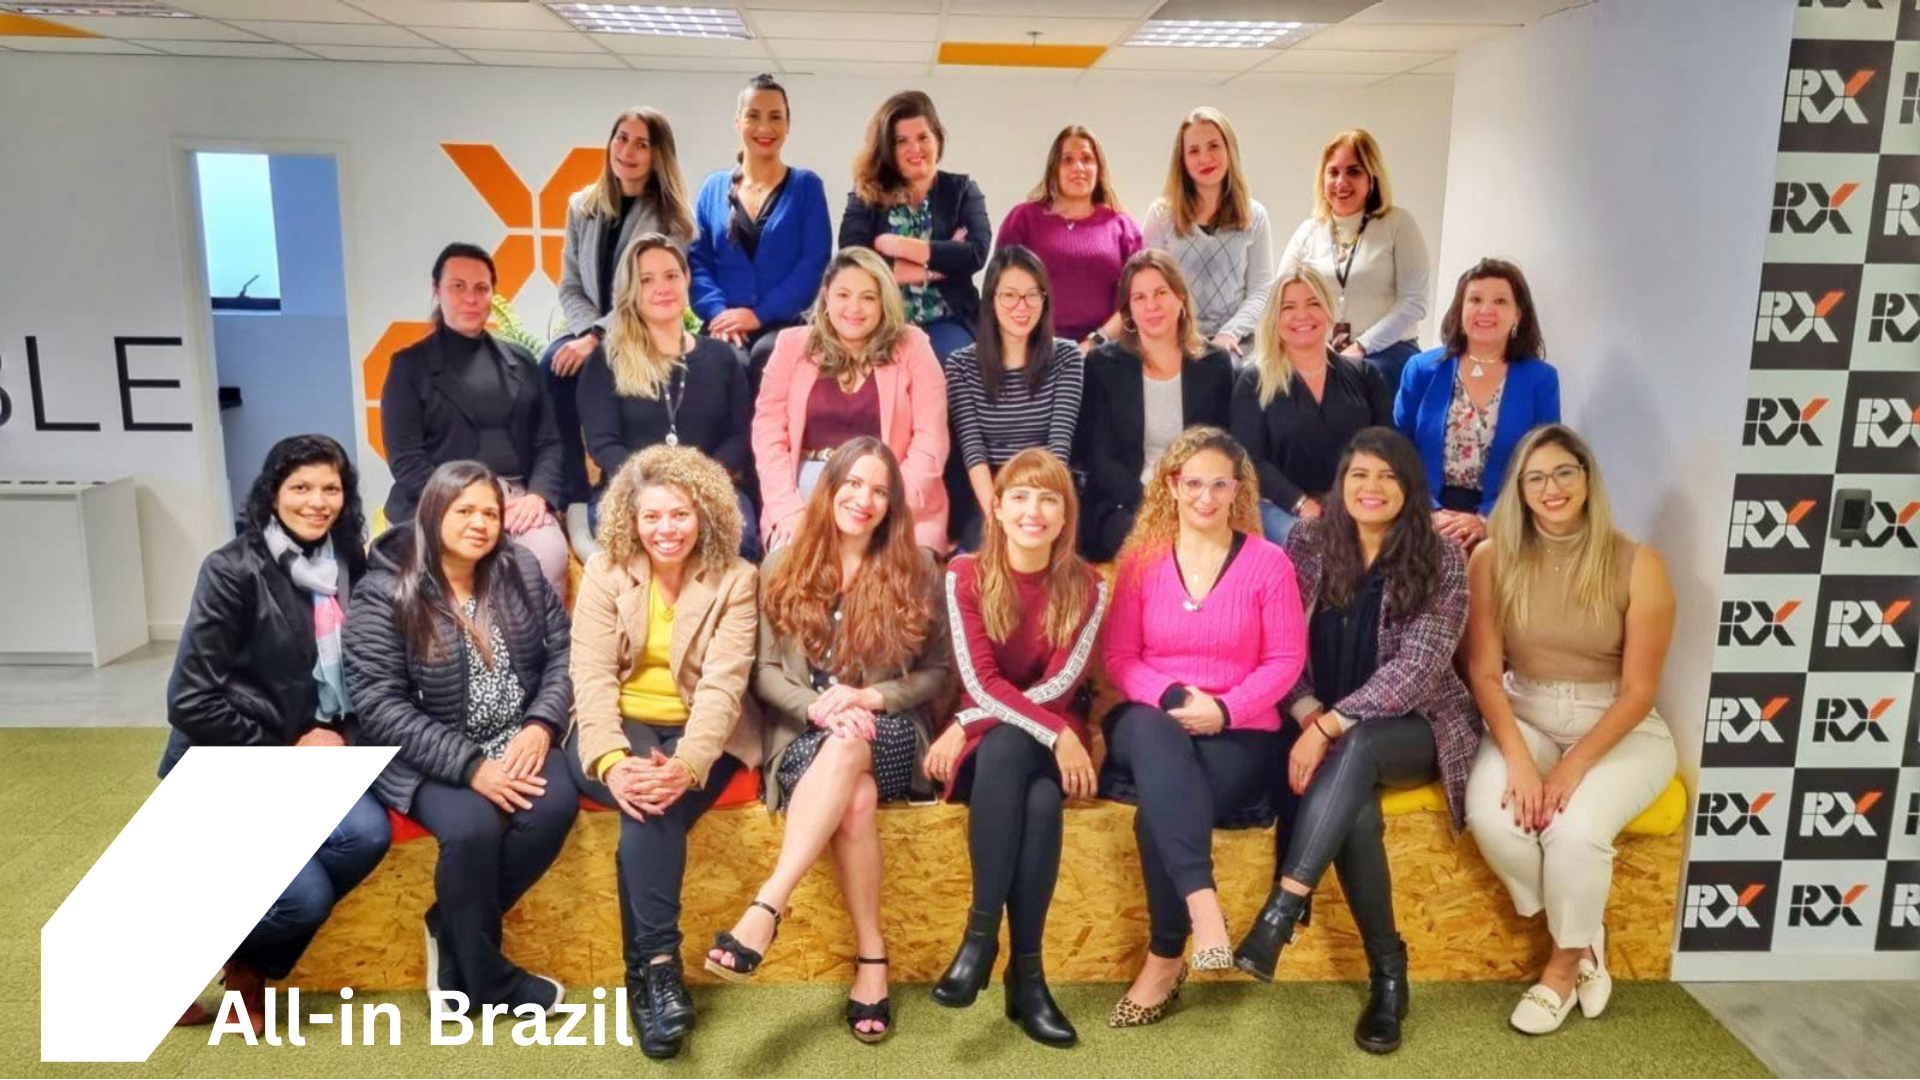 Group photo of Inclusion group: RX All-in Brazil, formed of all women